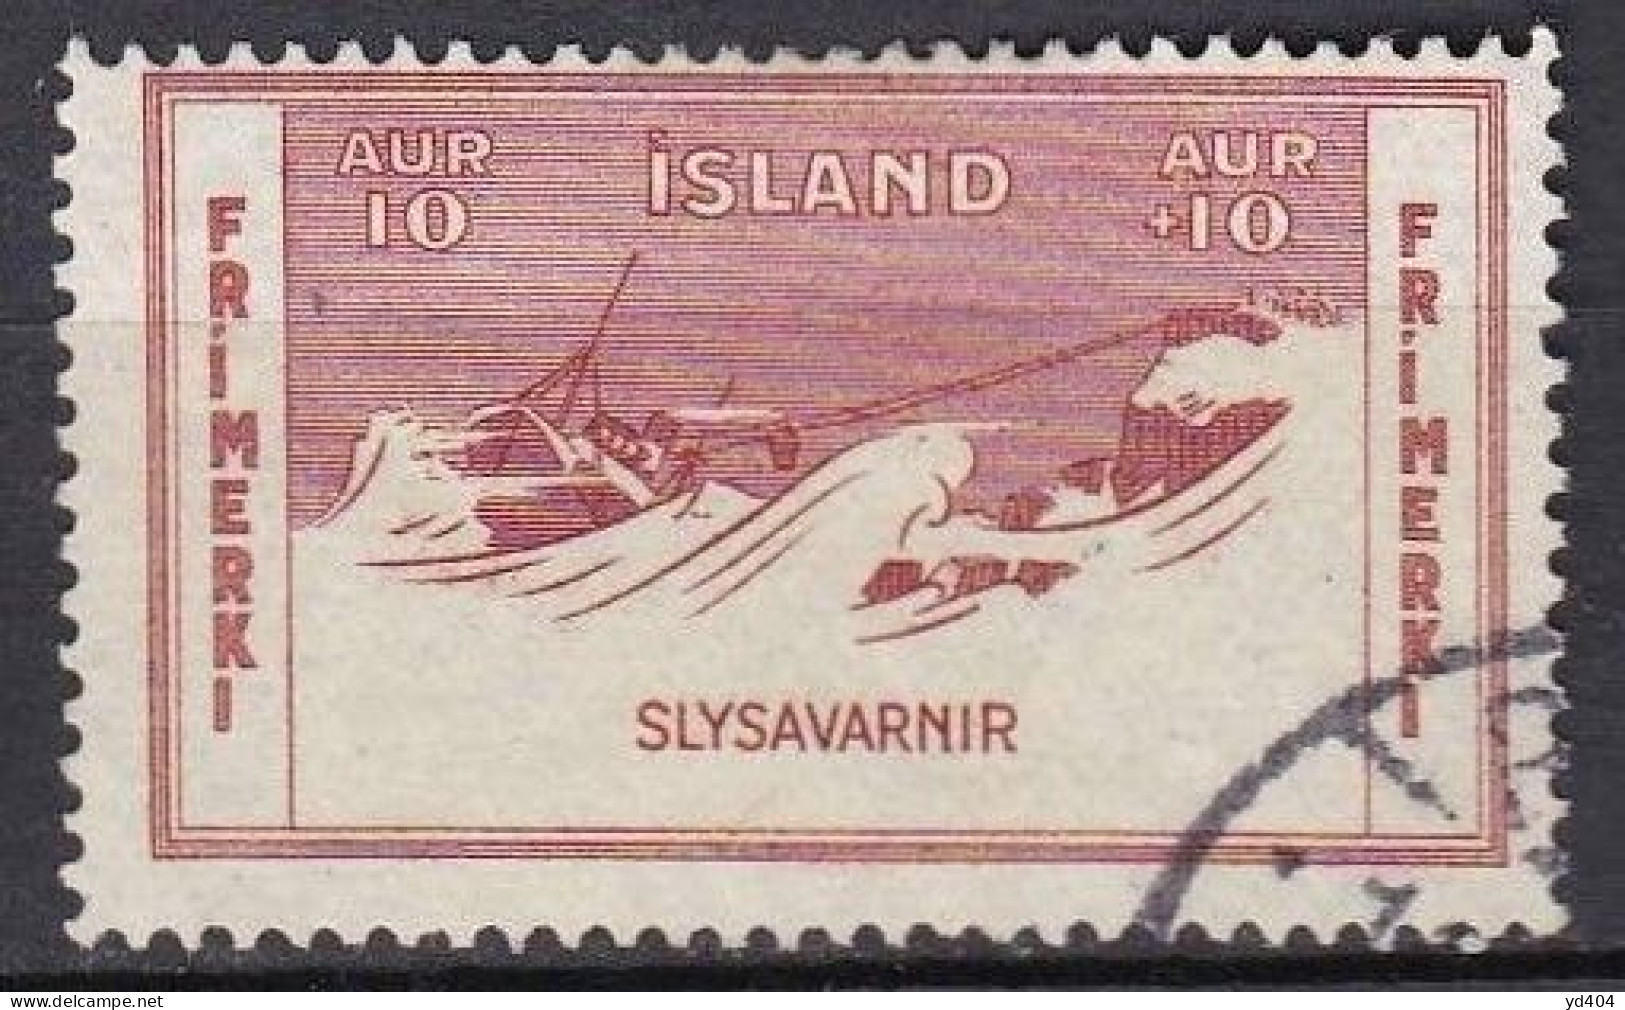 IS029A – ISLANDE – ICELAND – 1933 – MARITIME WORKS & RESCUE – SG # 201 USED 6,50 € - Oblitérés